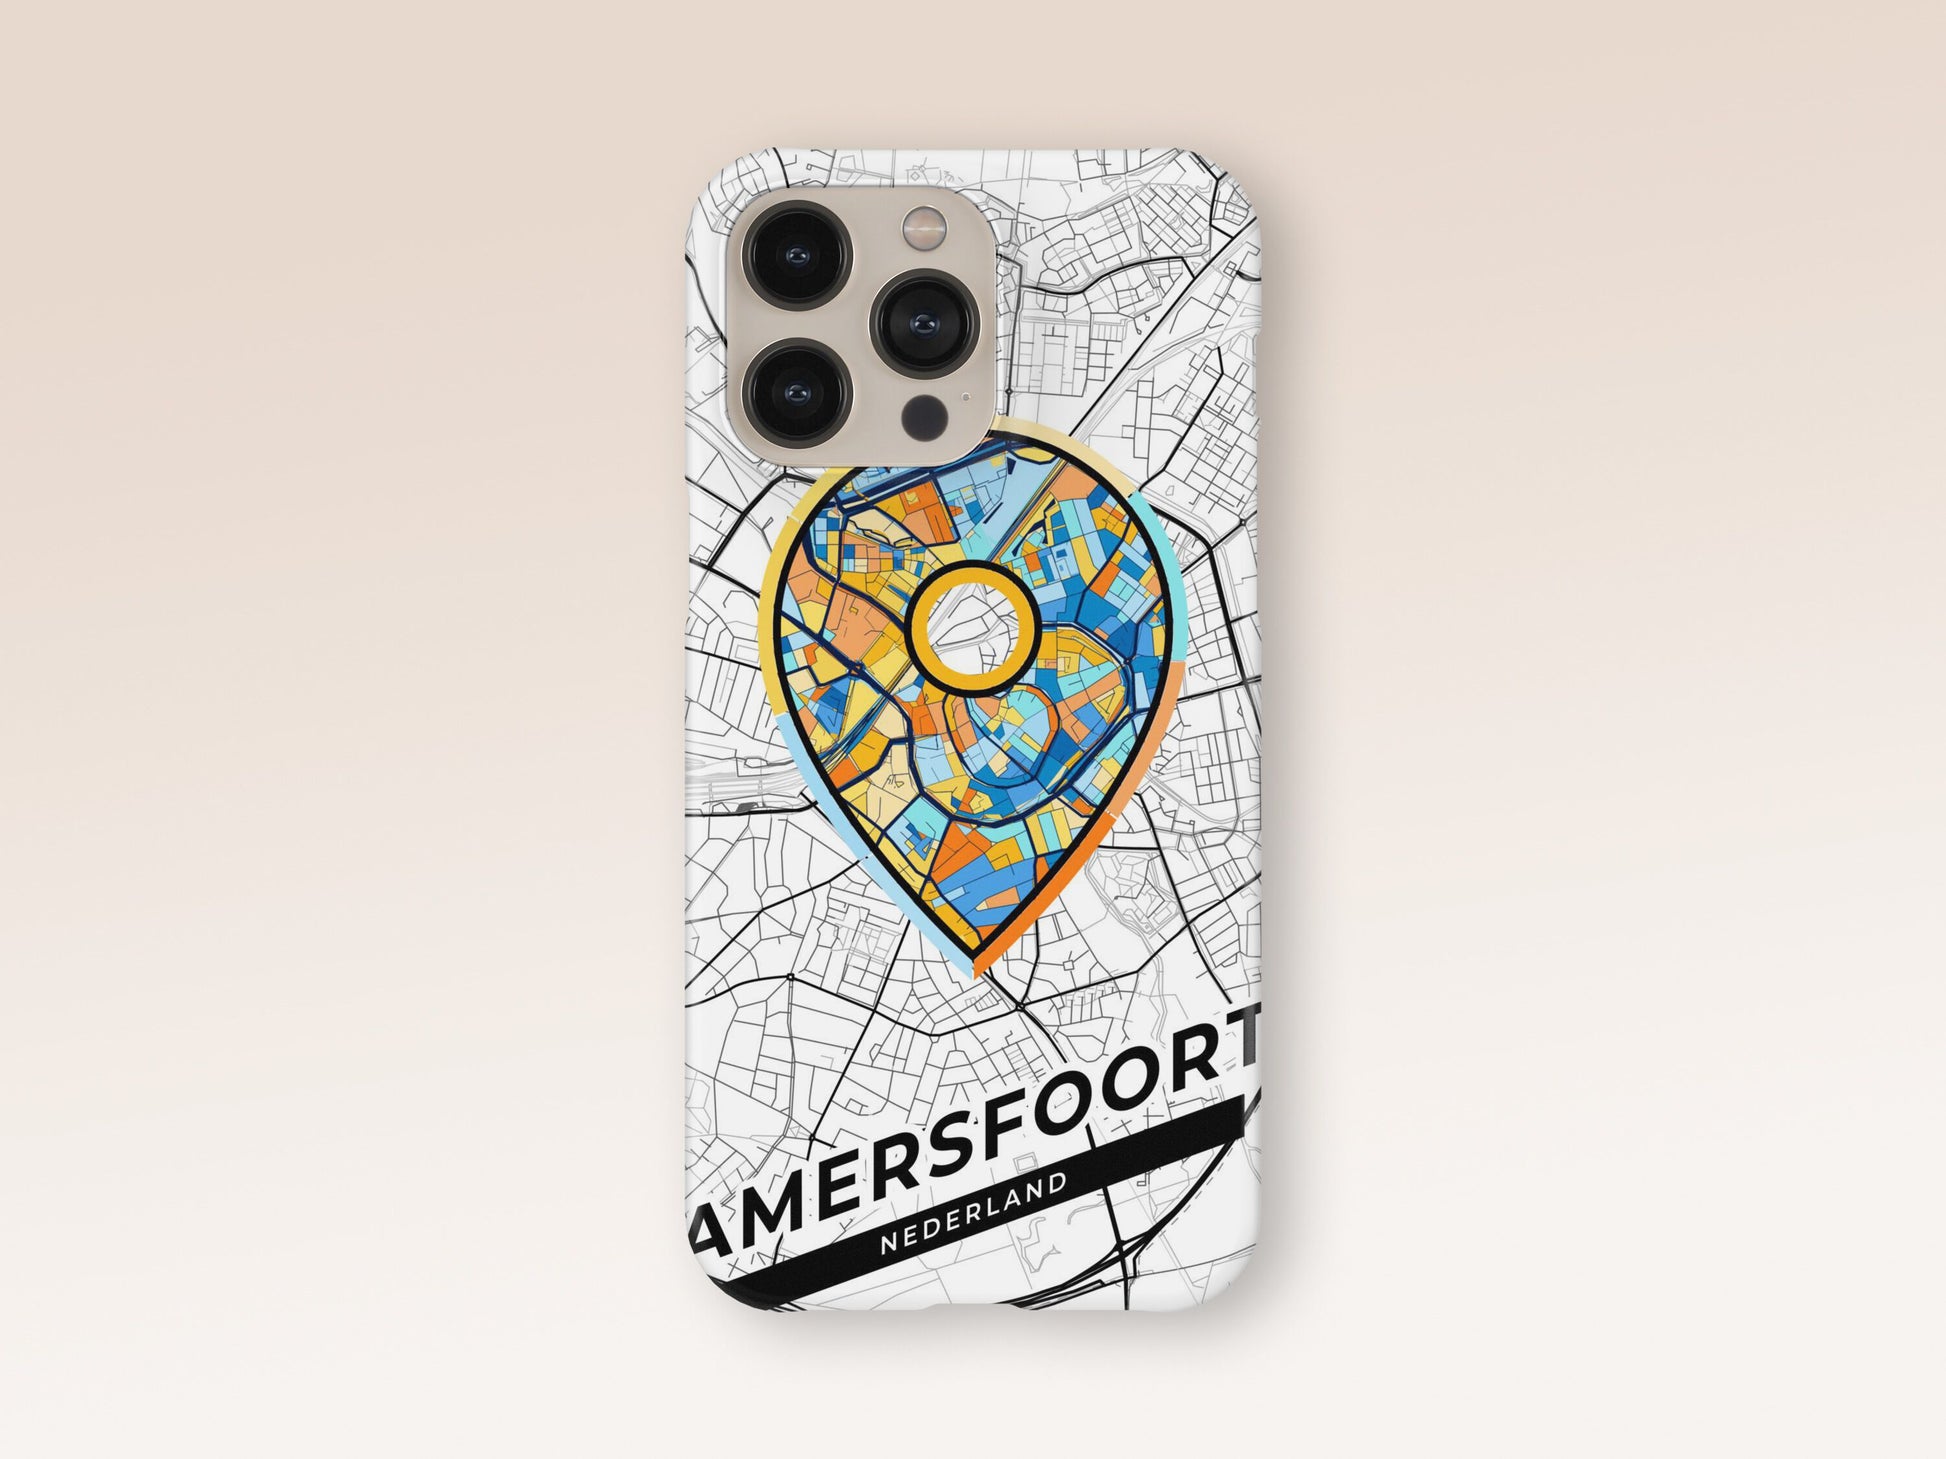 Amersfoort Netherlands slim phone case with colorful icon. Birthday, wedding or housewarming gift. Couple match cases. 1